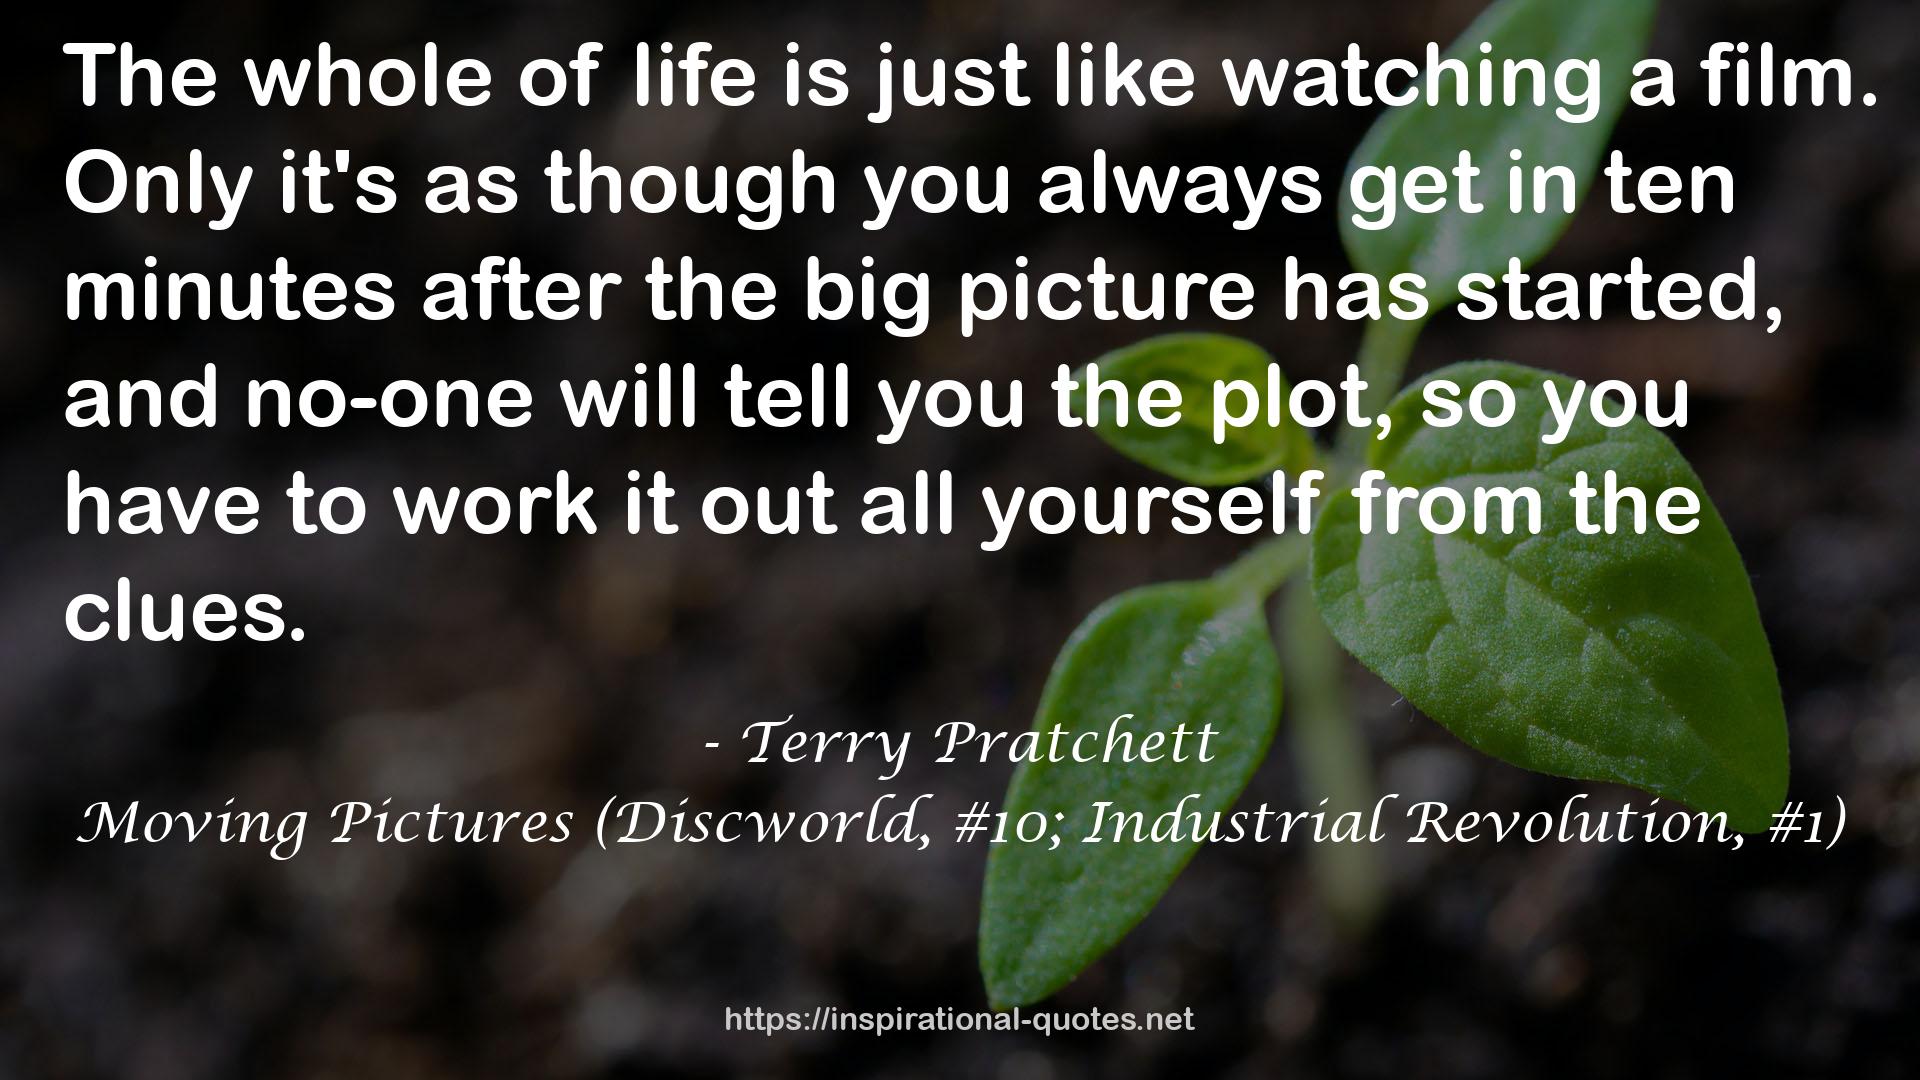 Moving Pictures (Discworld, #10; Industrial Revolution, #1) QUOTES